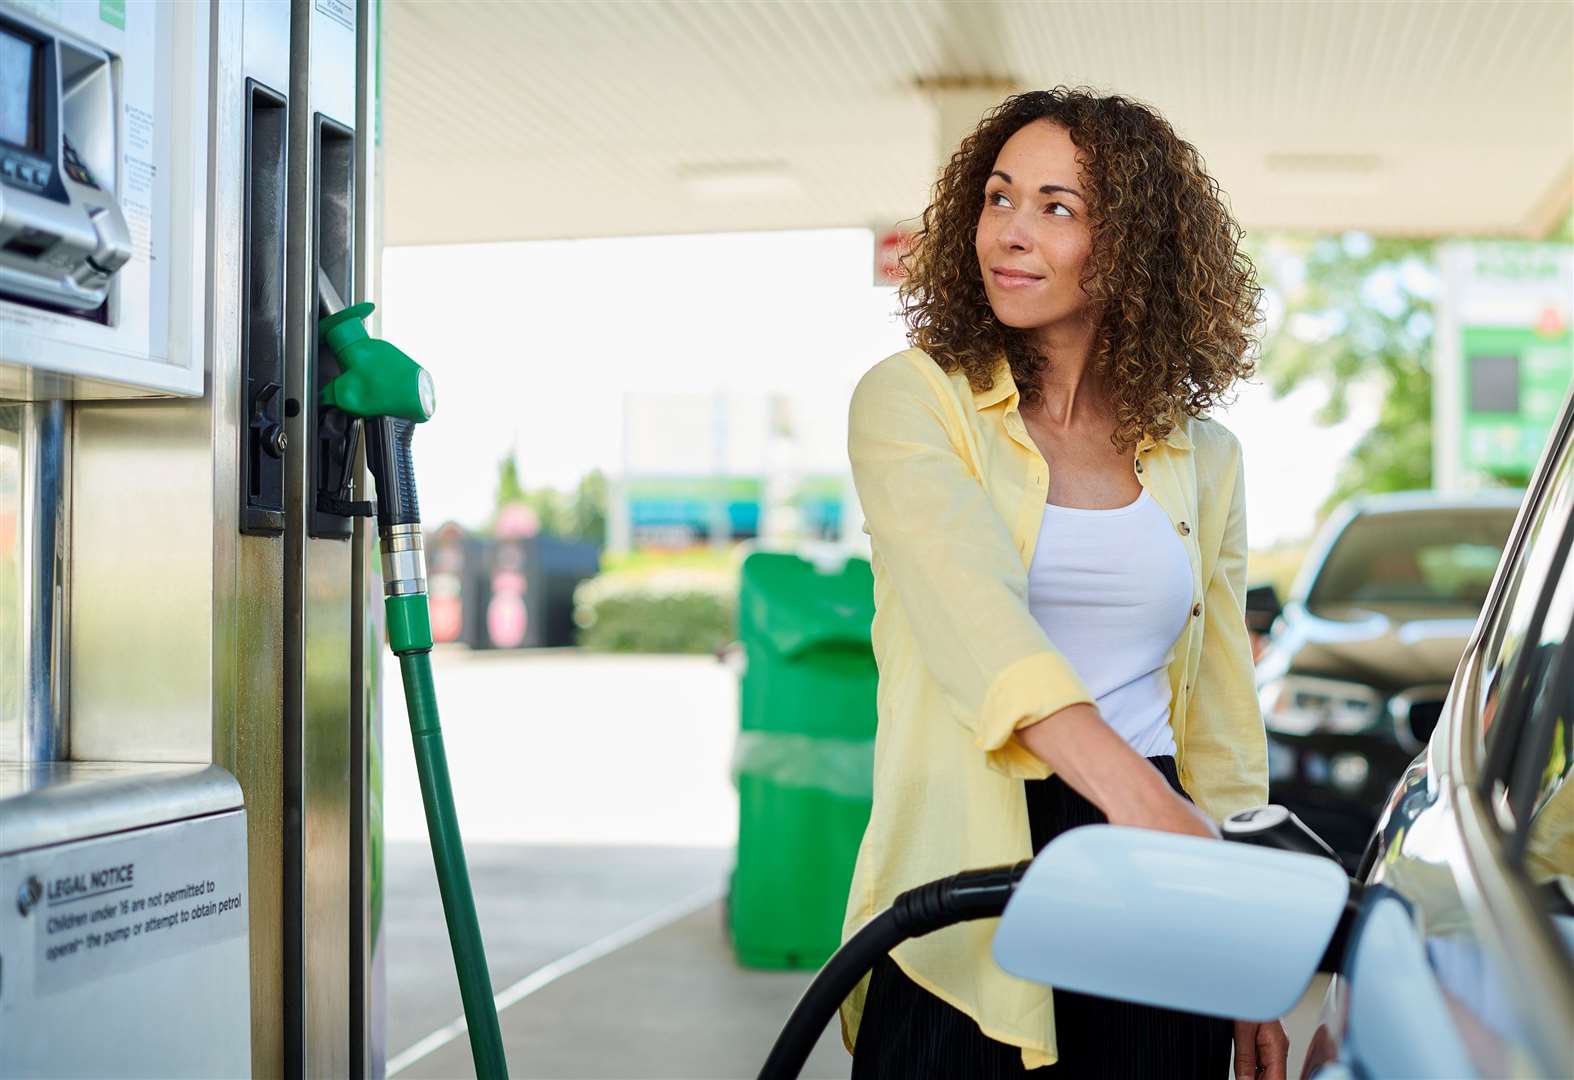 Motoring groups fear petrol could soon hit 150p a litre. Image: iStock.